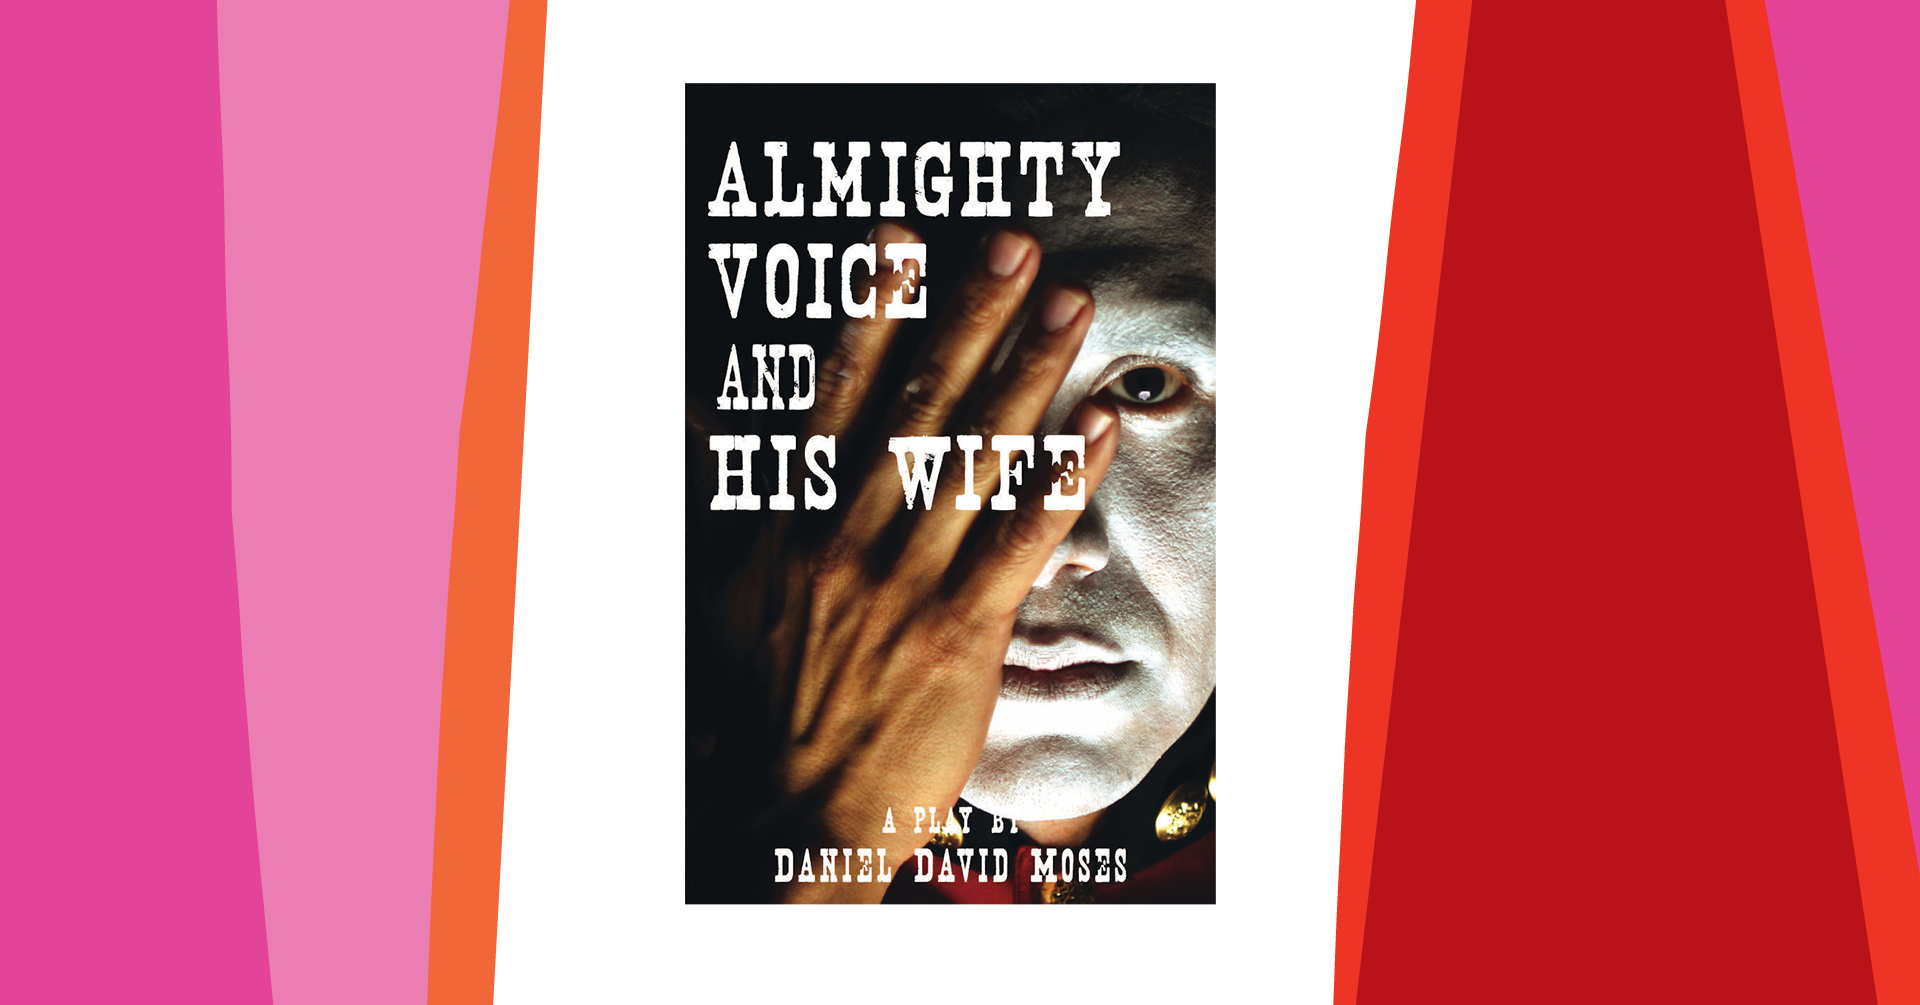 The Re-Read: Almighty Voice and his Wife by Daniel David Moses